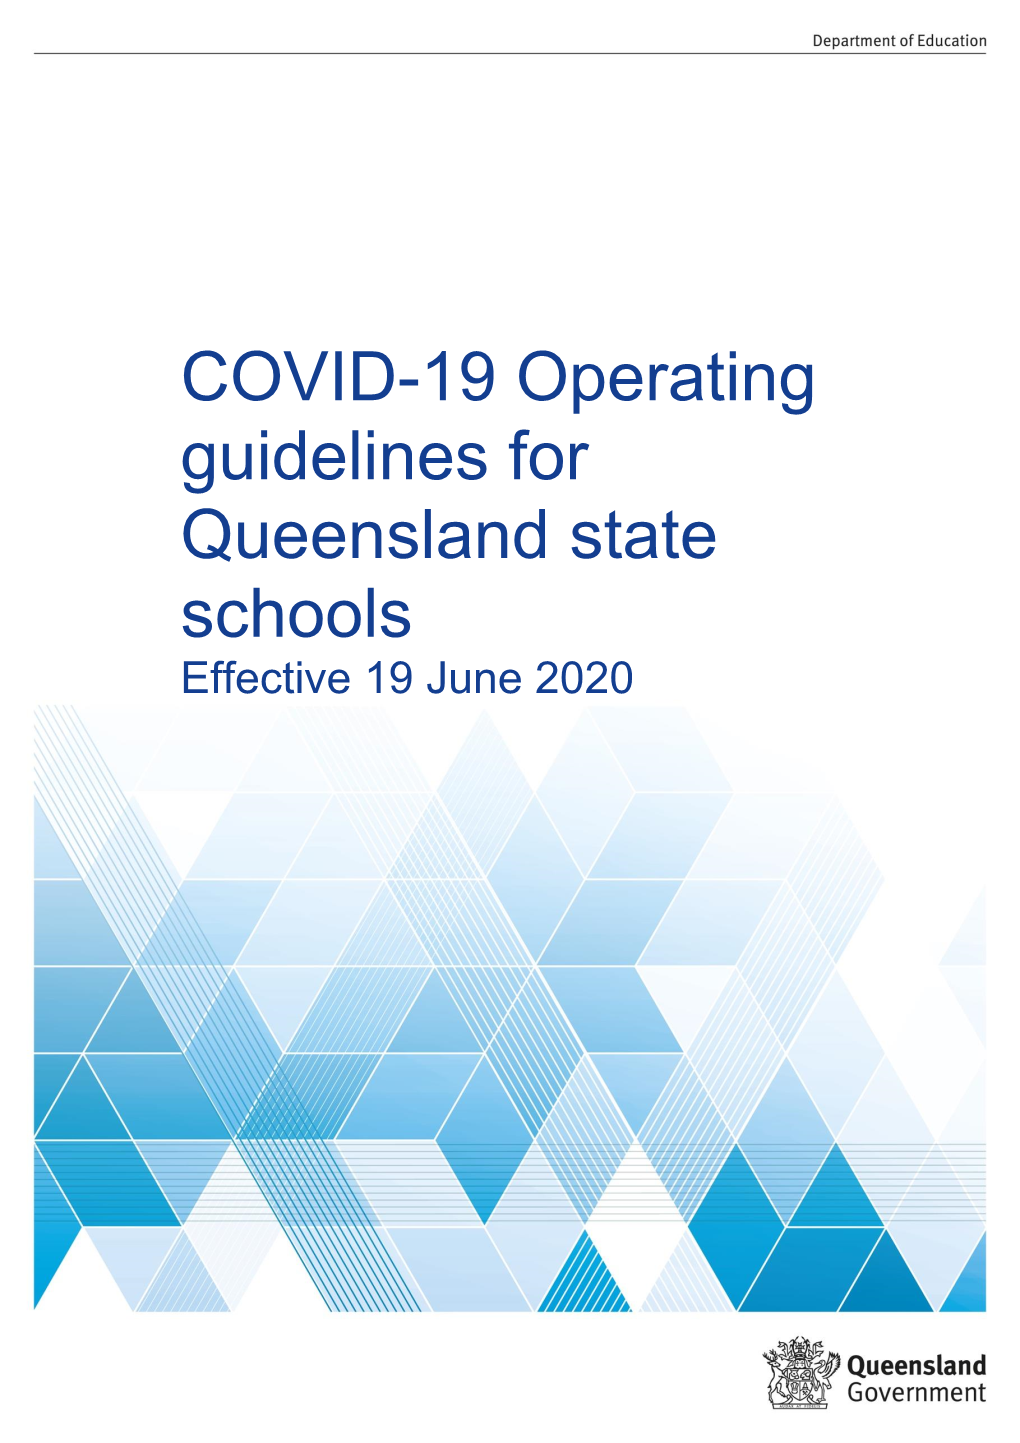 COVID-19 Operating Guidelines for Queensland State Schools Effective 19 June 2020